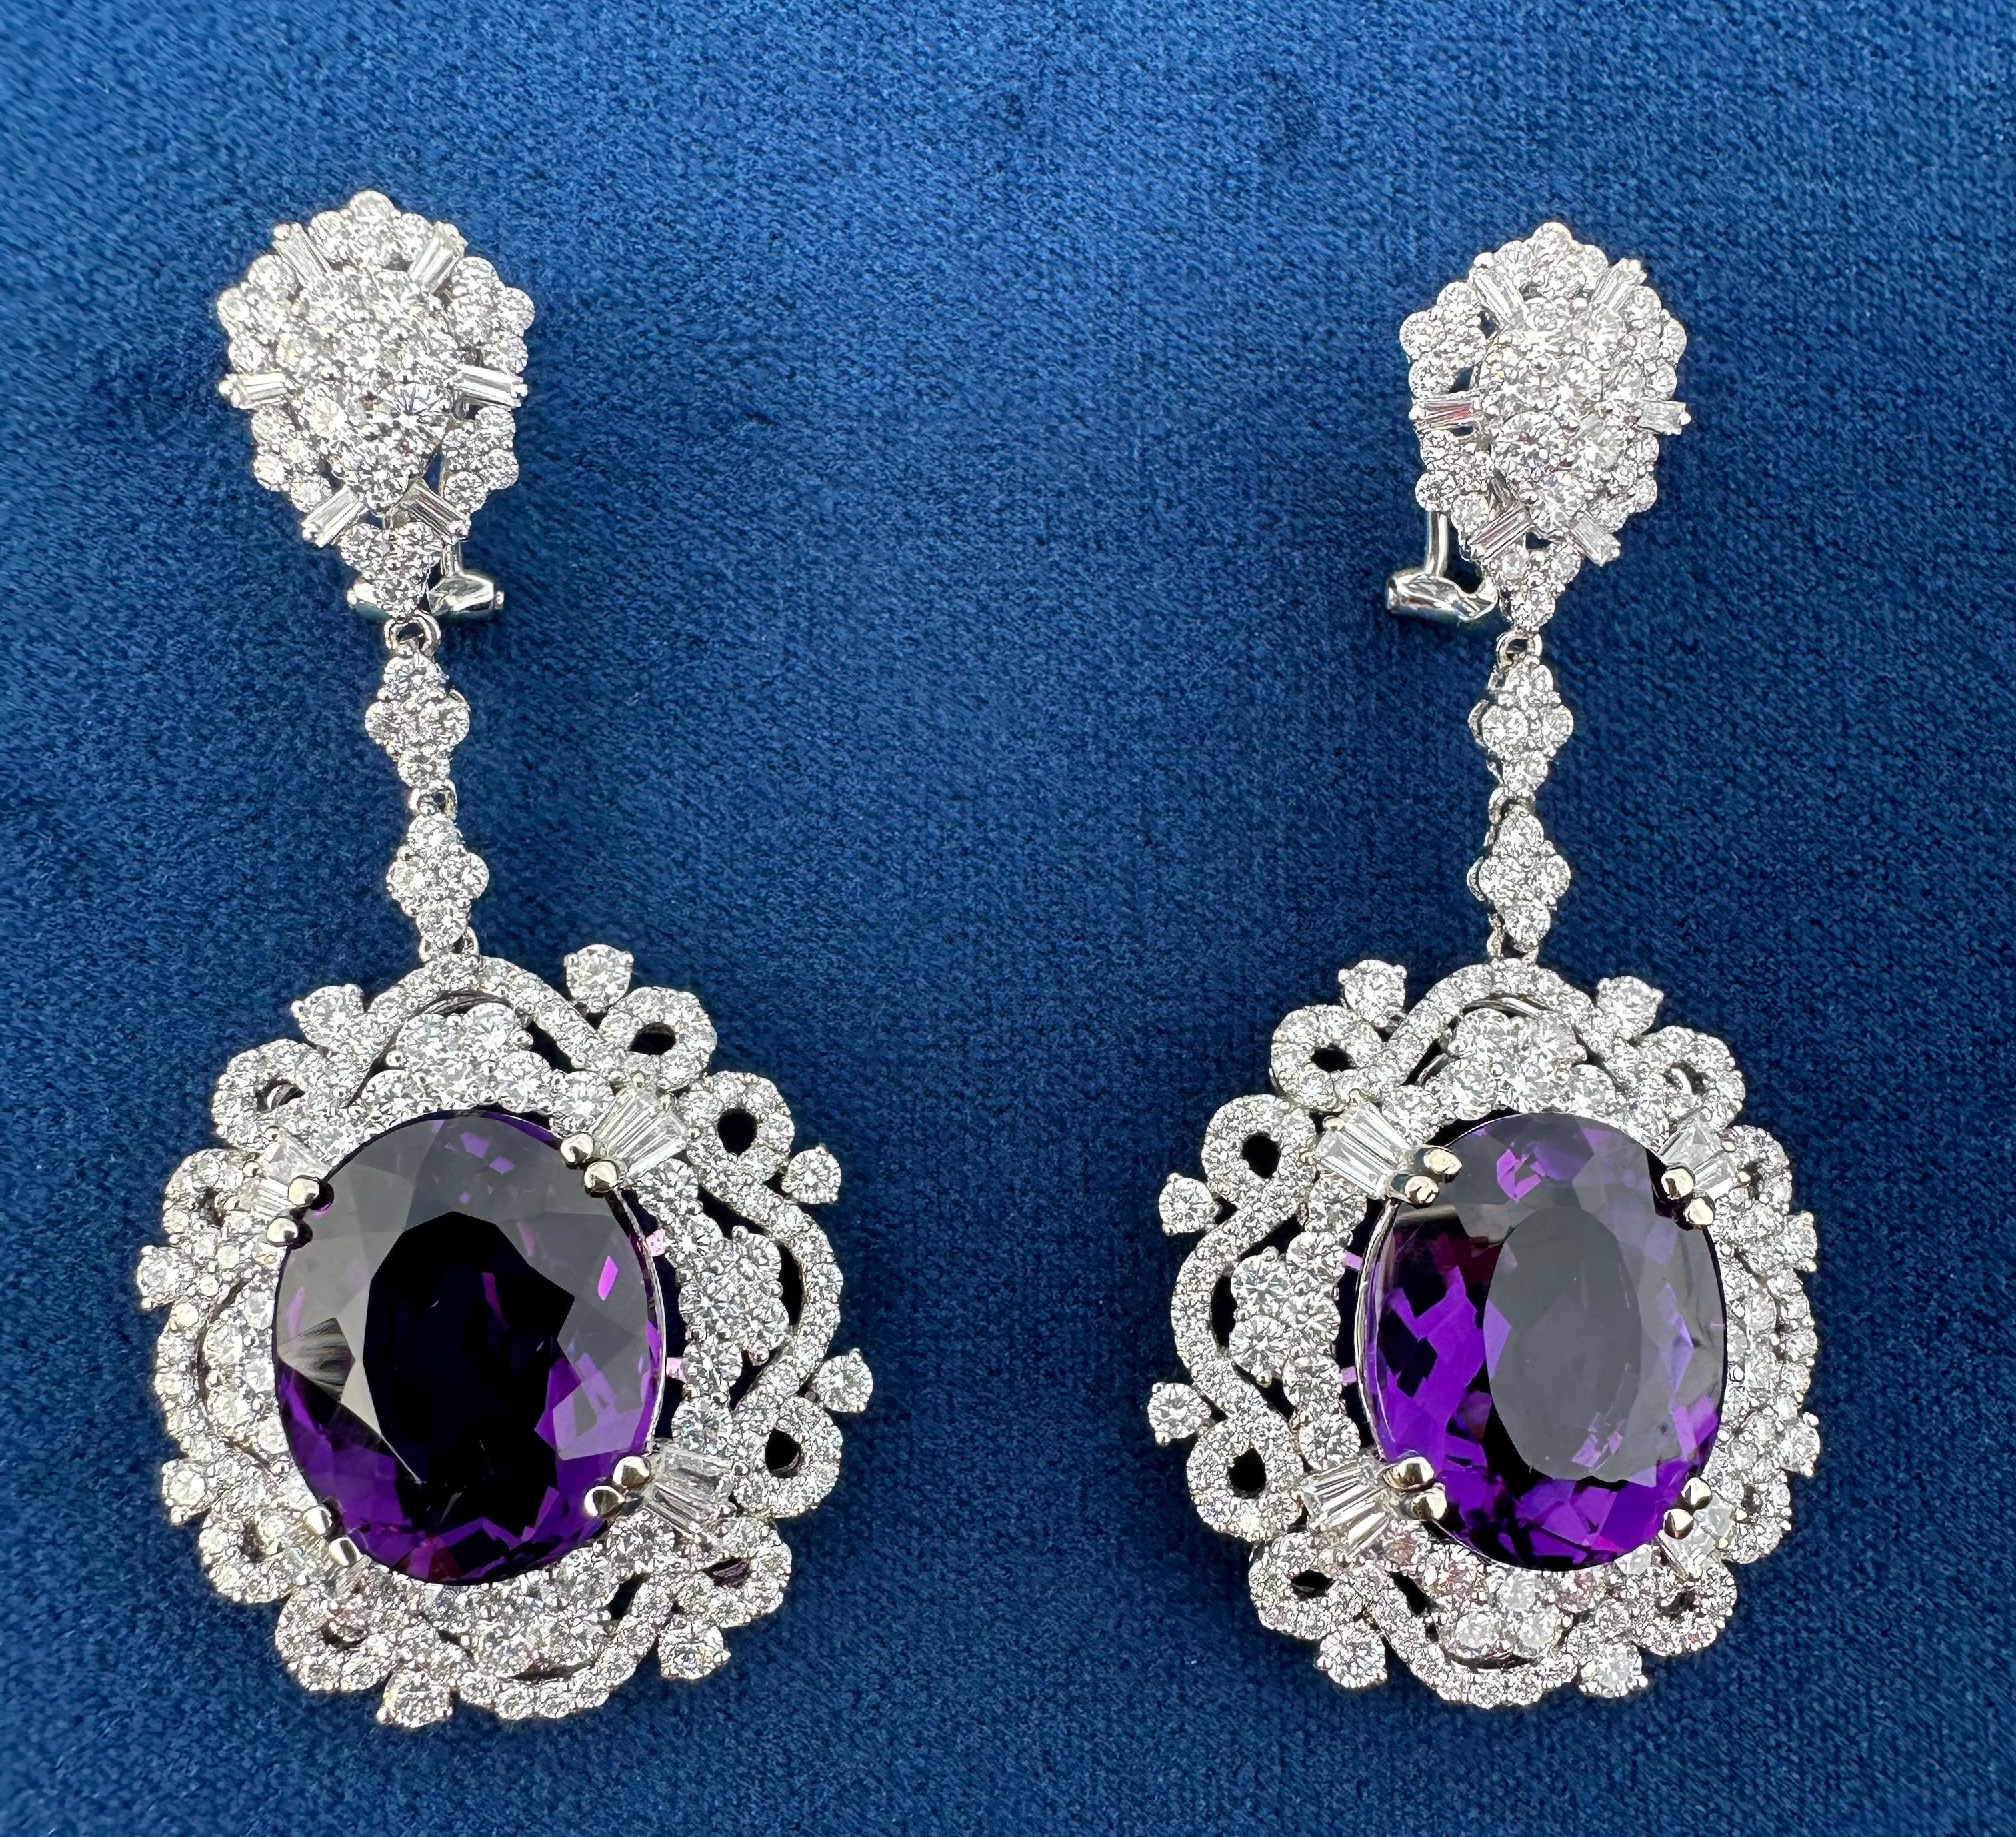 Exquisite Pair of 42.49 Carat Amethyst and Diamond 18K White Gold Earrings For Sale 1